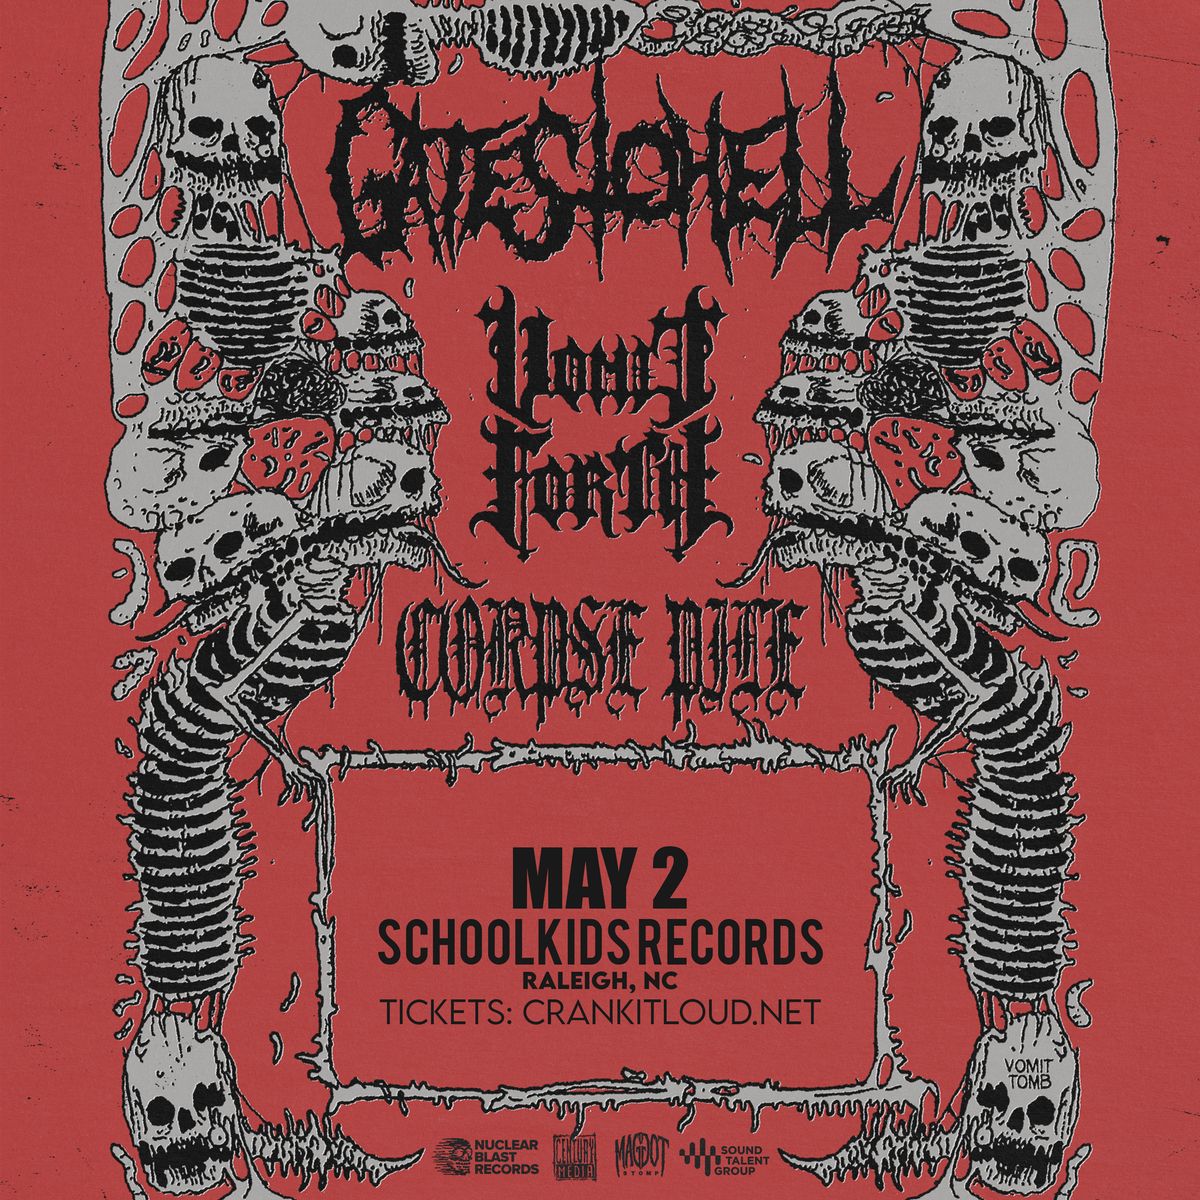 Gates To Hell at Schoolkids Records with Vomit Forth and Corpse Pile